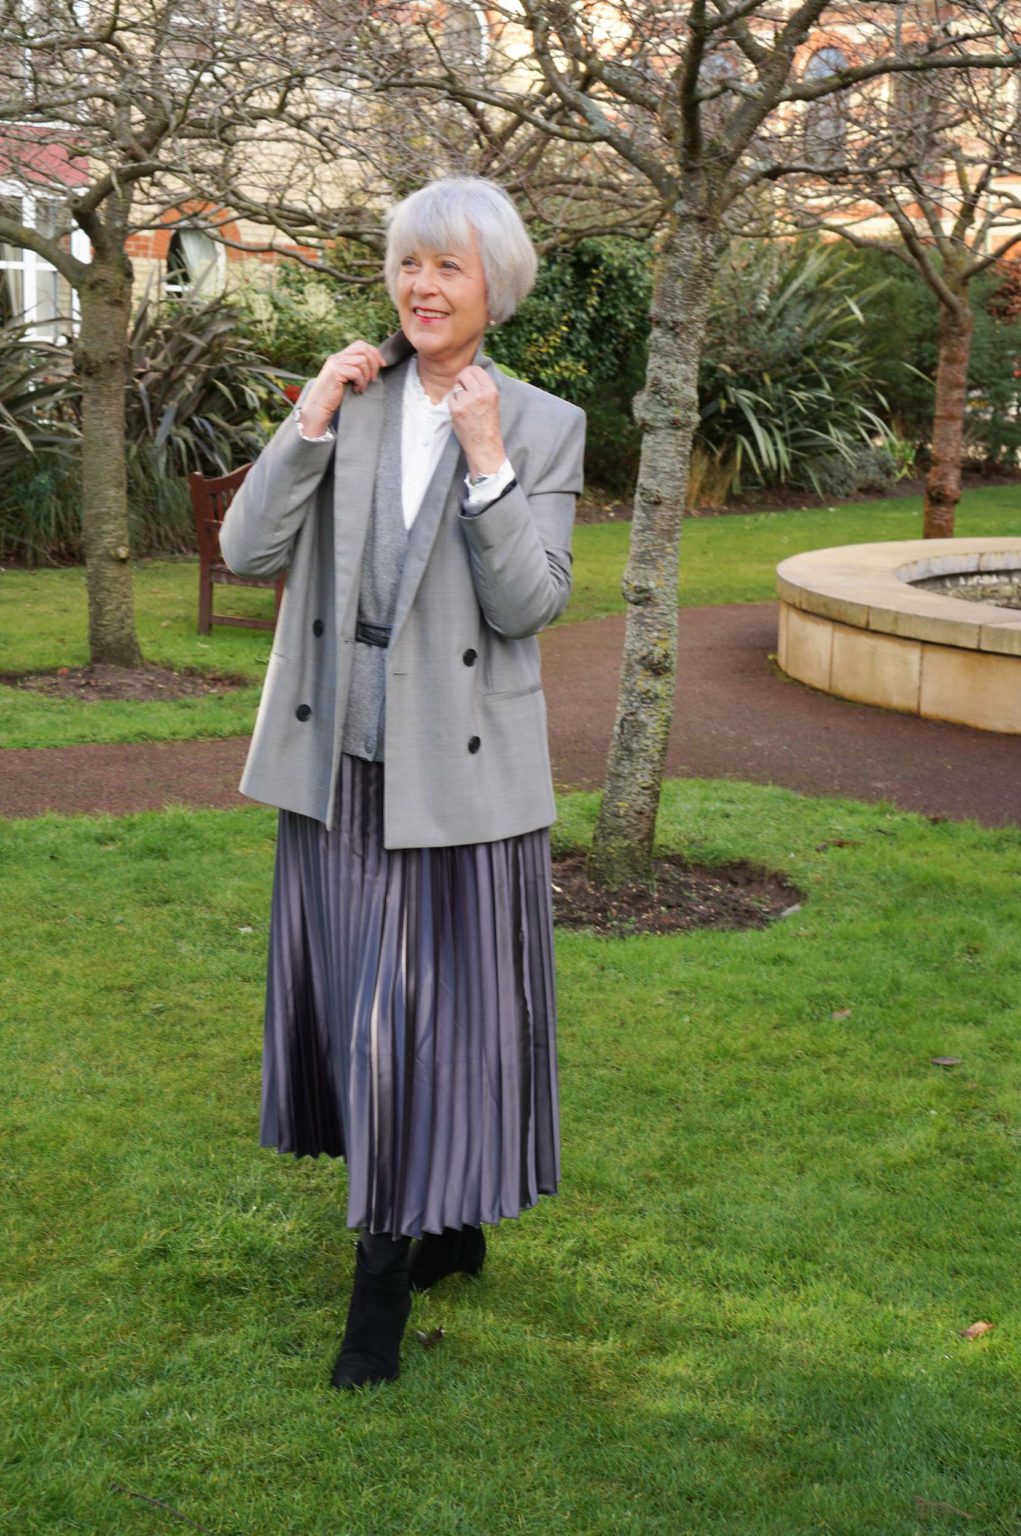 The joy of wearing a skirt again - Chic at any age